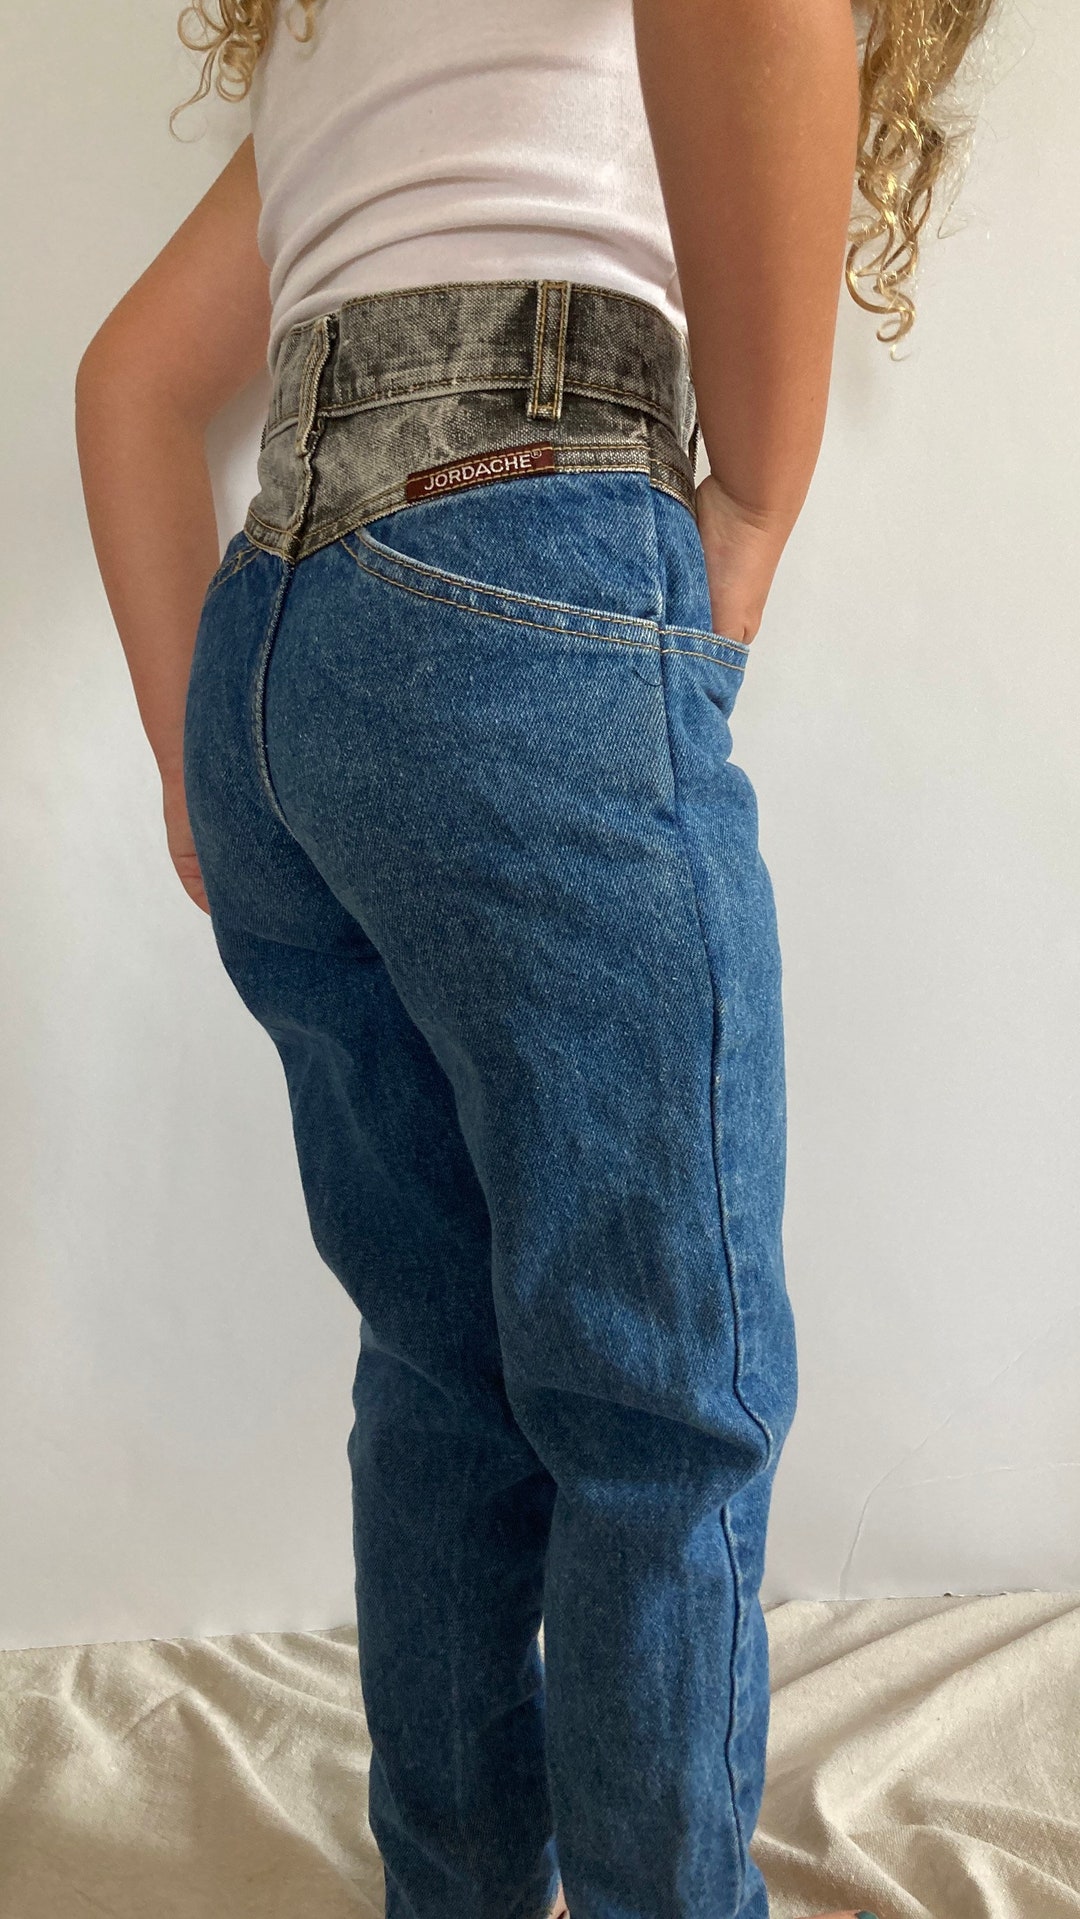 1980s, 1990s, Vintage Jordache Jeans, Two Tone Denim, High Rise Jeans,  Tapered, High Waisted, Rare Retro Kids Jeans, 5T, 6, Usa Made, 20 -   Canada